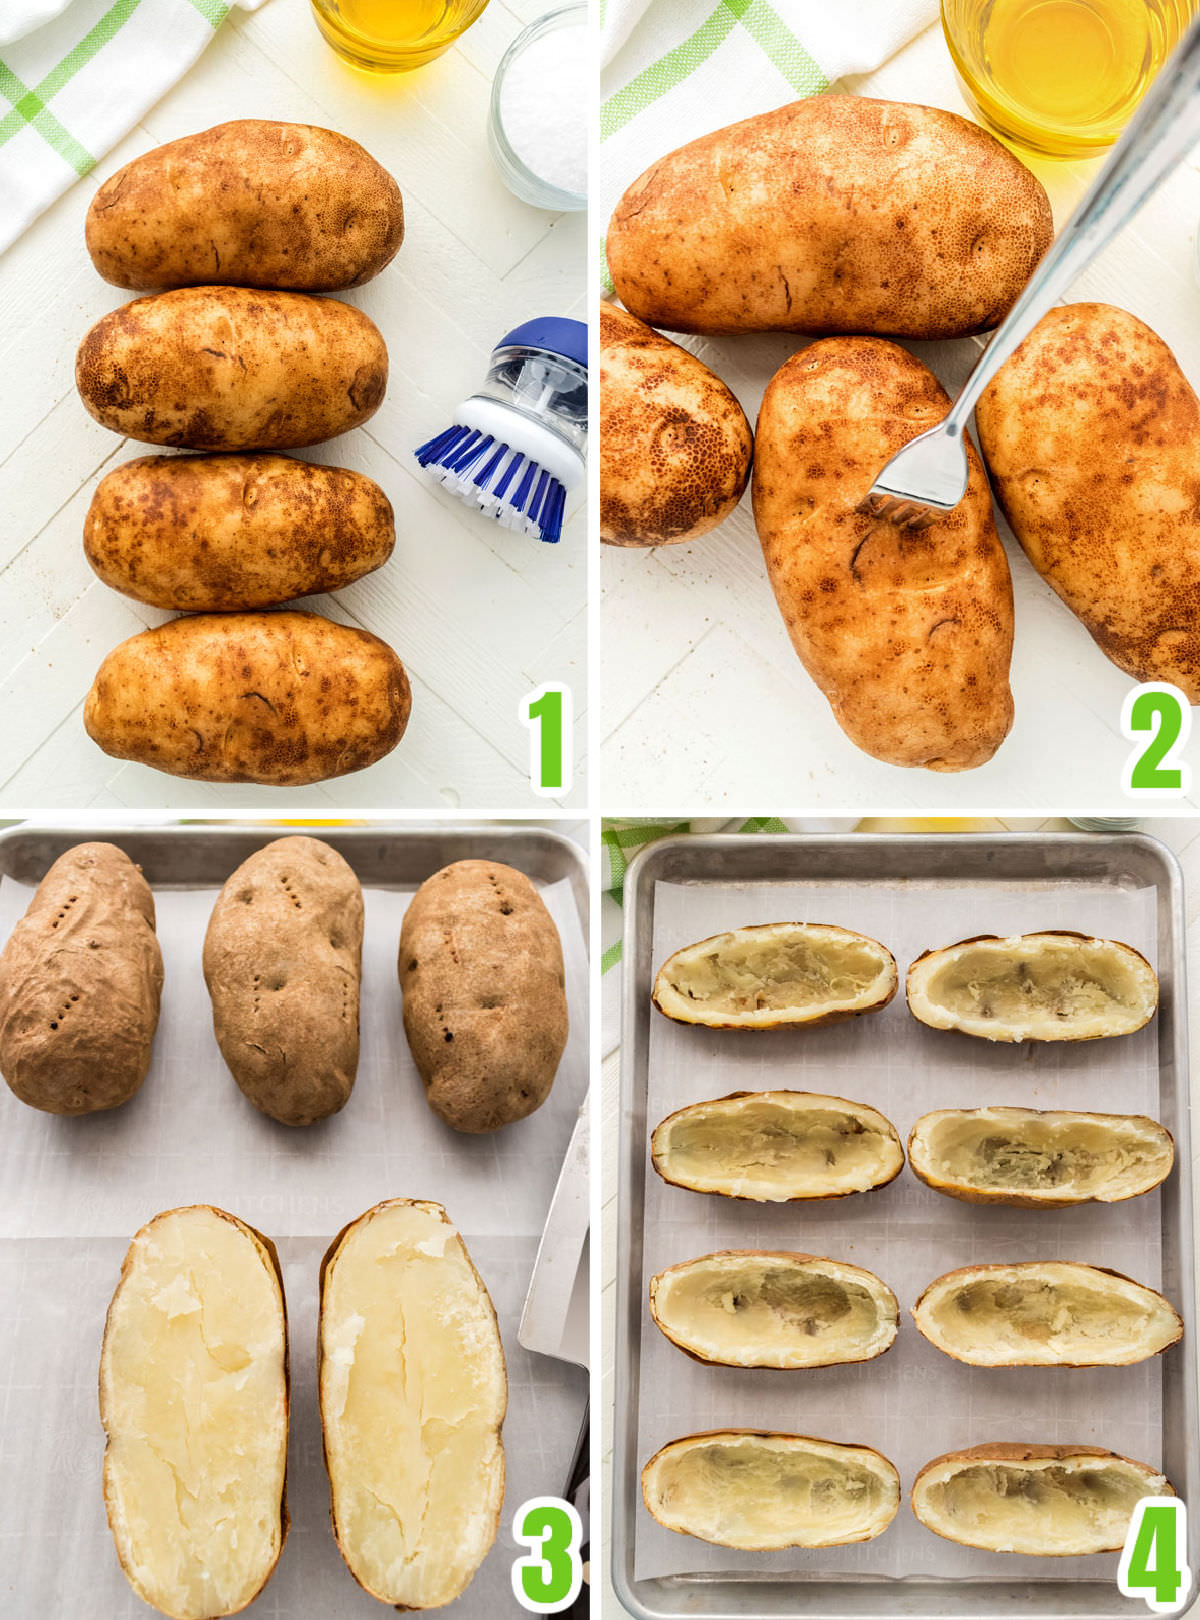 Collage image showing the steps required to bake the potatoes to turn into Twice Baked Potatoes.